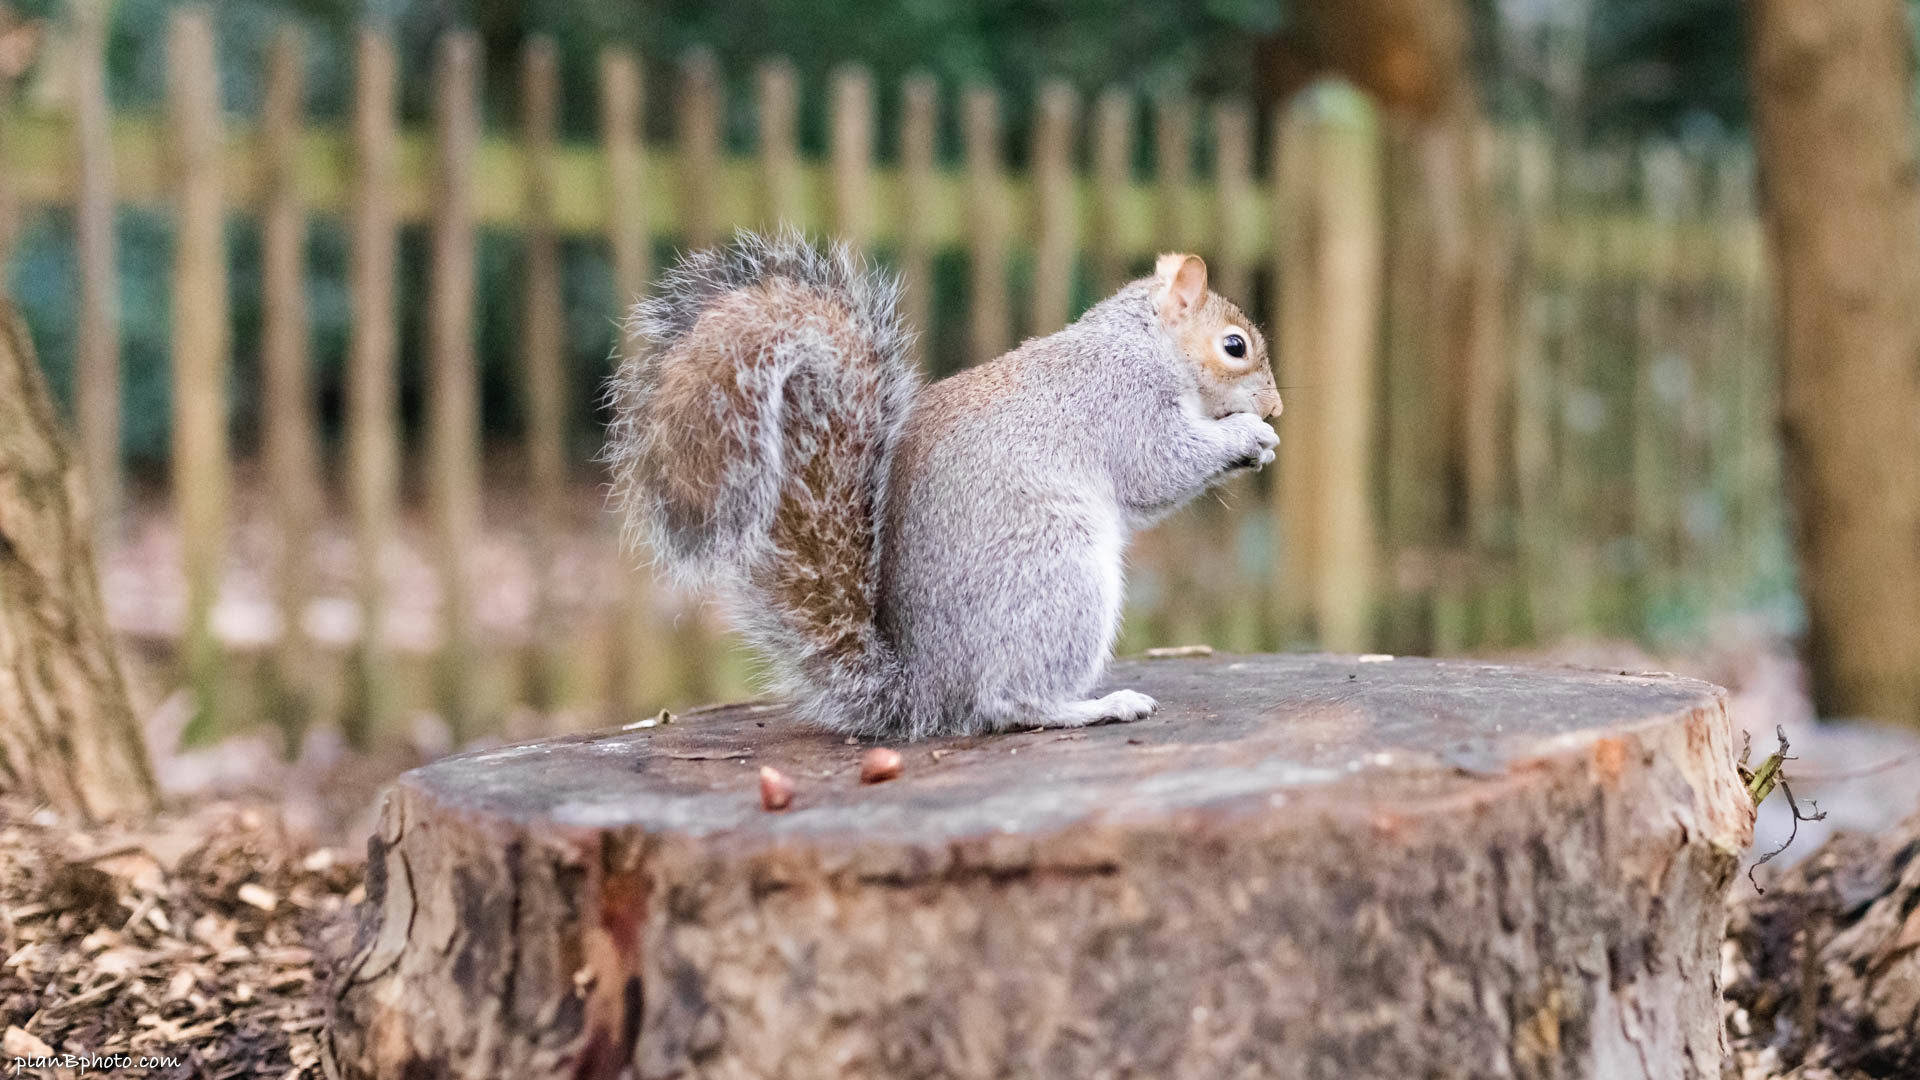 Grey squirrel on a tree trunk in a park